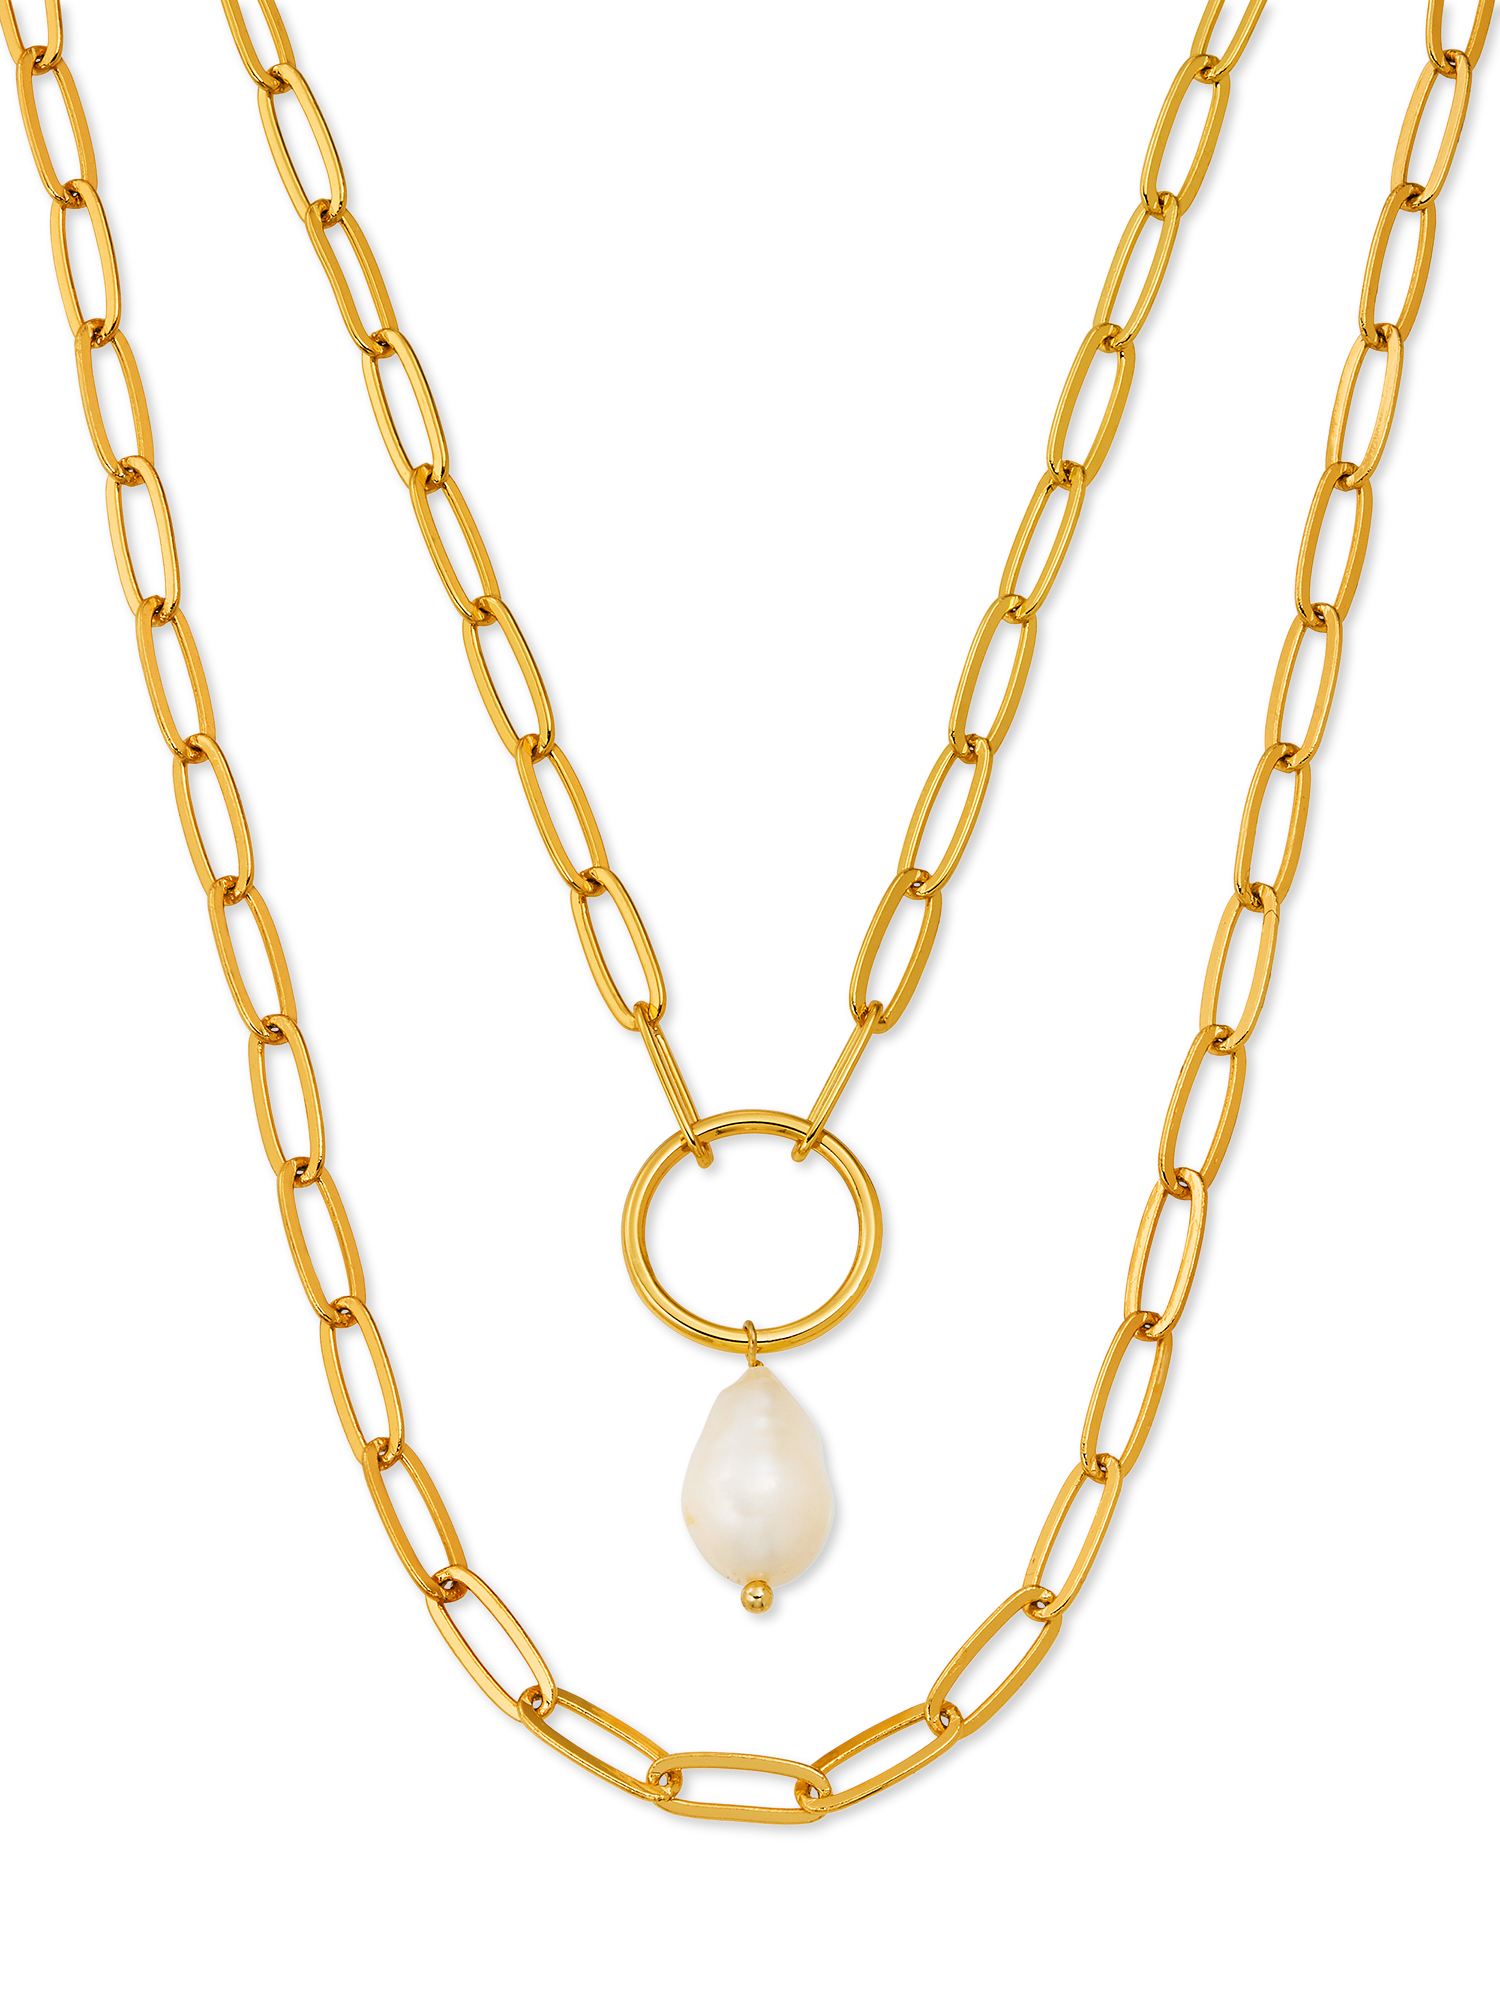 Scoop Brass Yellow Gold-Plated Layered Imitation Pearl Link Necklace, 15" + 3" Extender - image 1 of 4